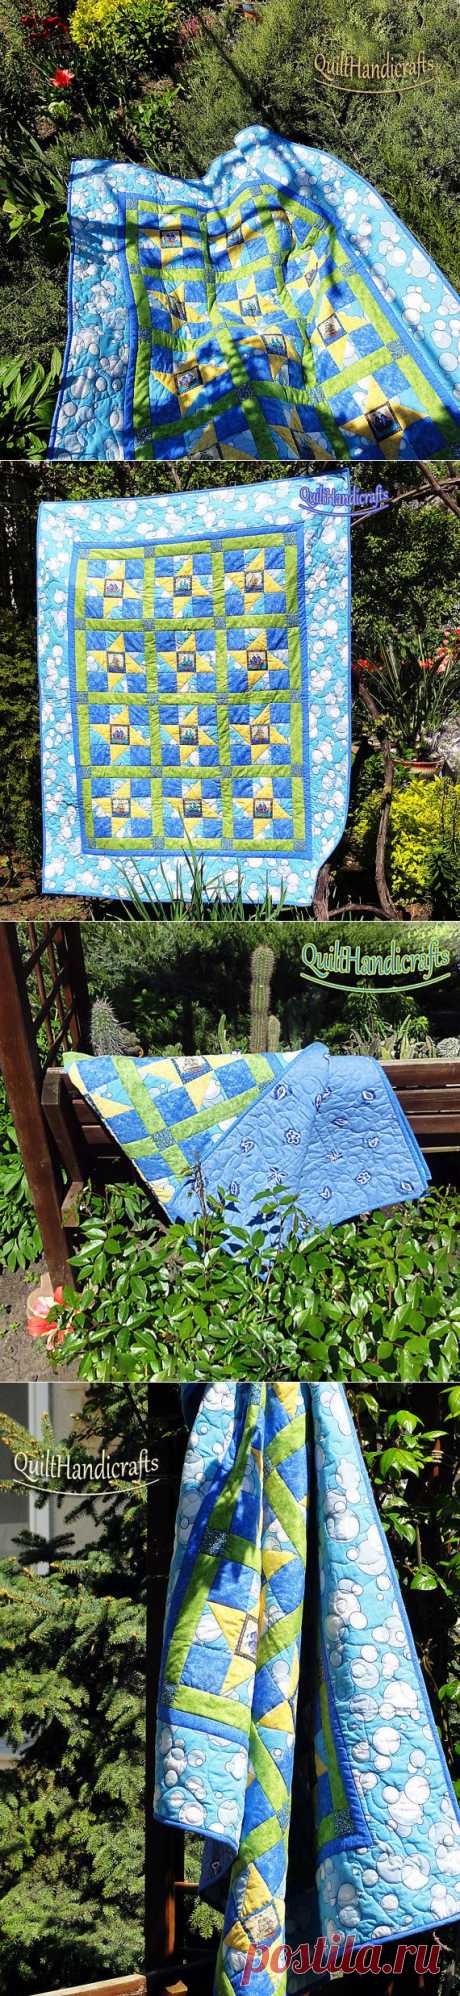 Beautiful handmade baby quilt Blanket in a by QuiltHandicrafts